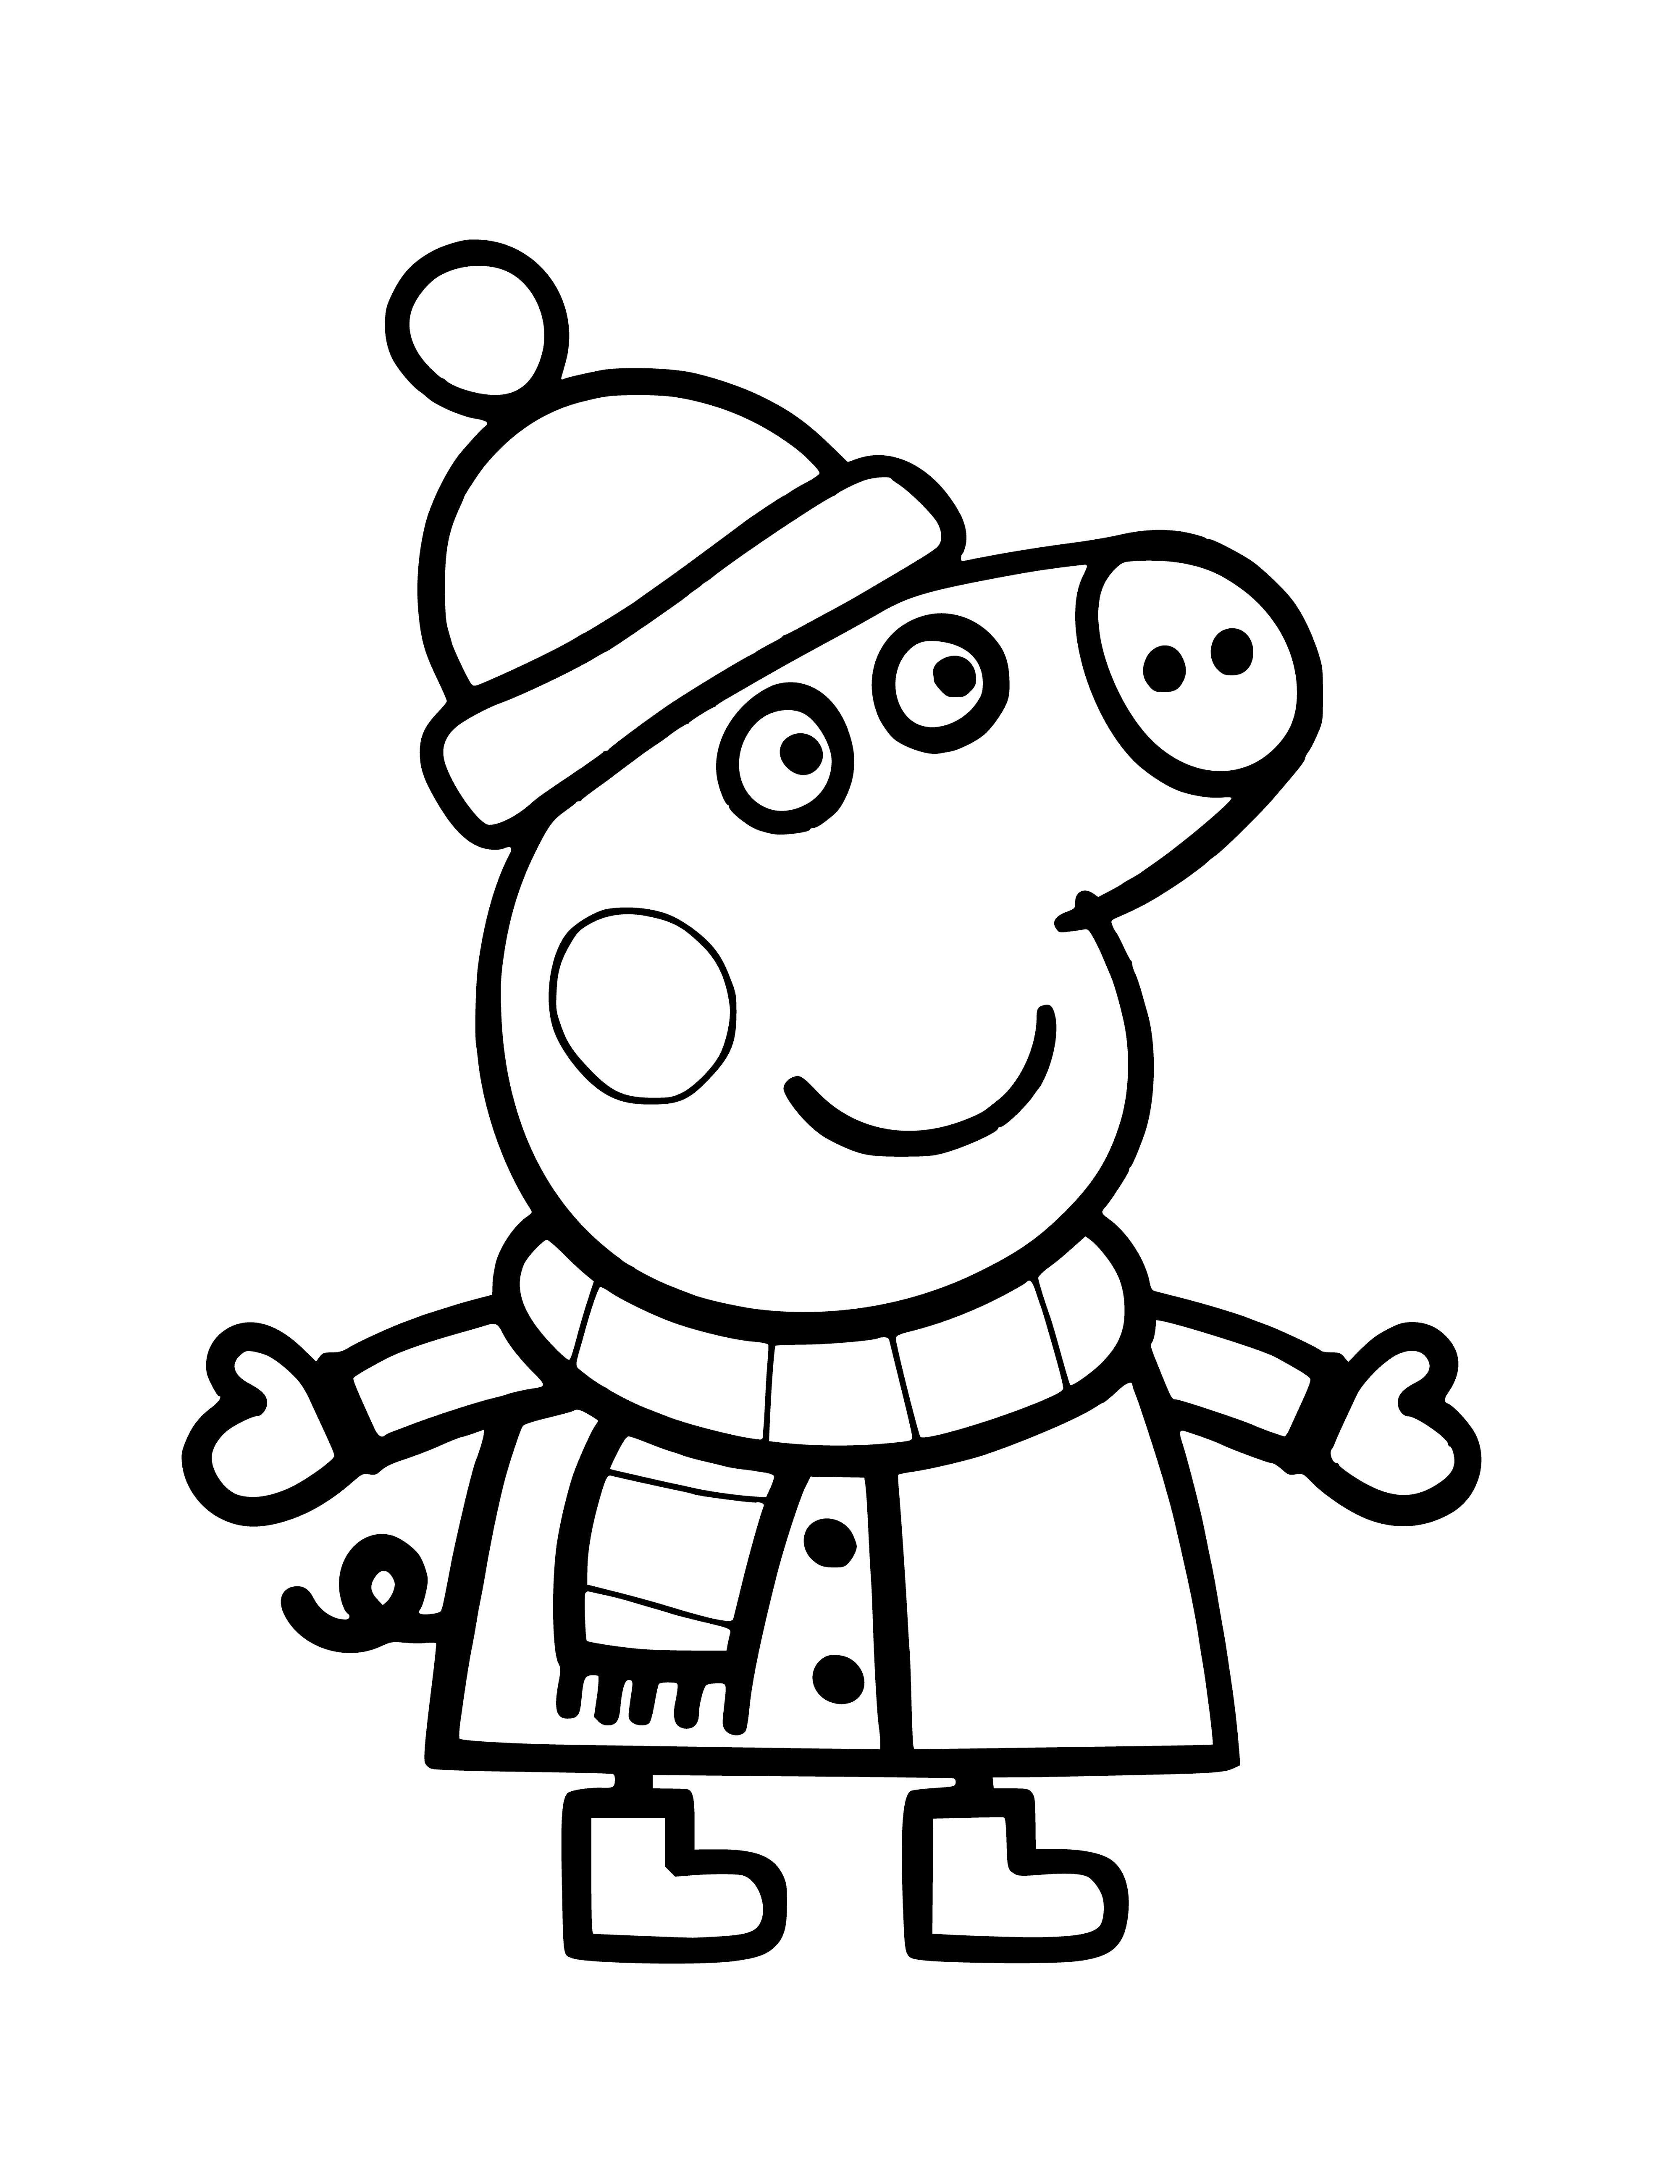 Peppa Pig in winter clothes coloring page